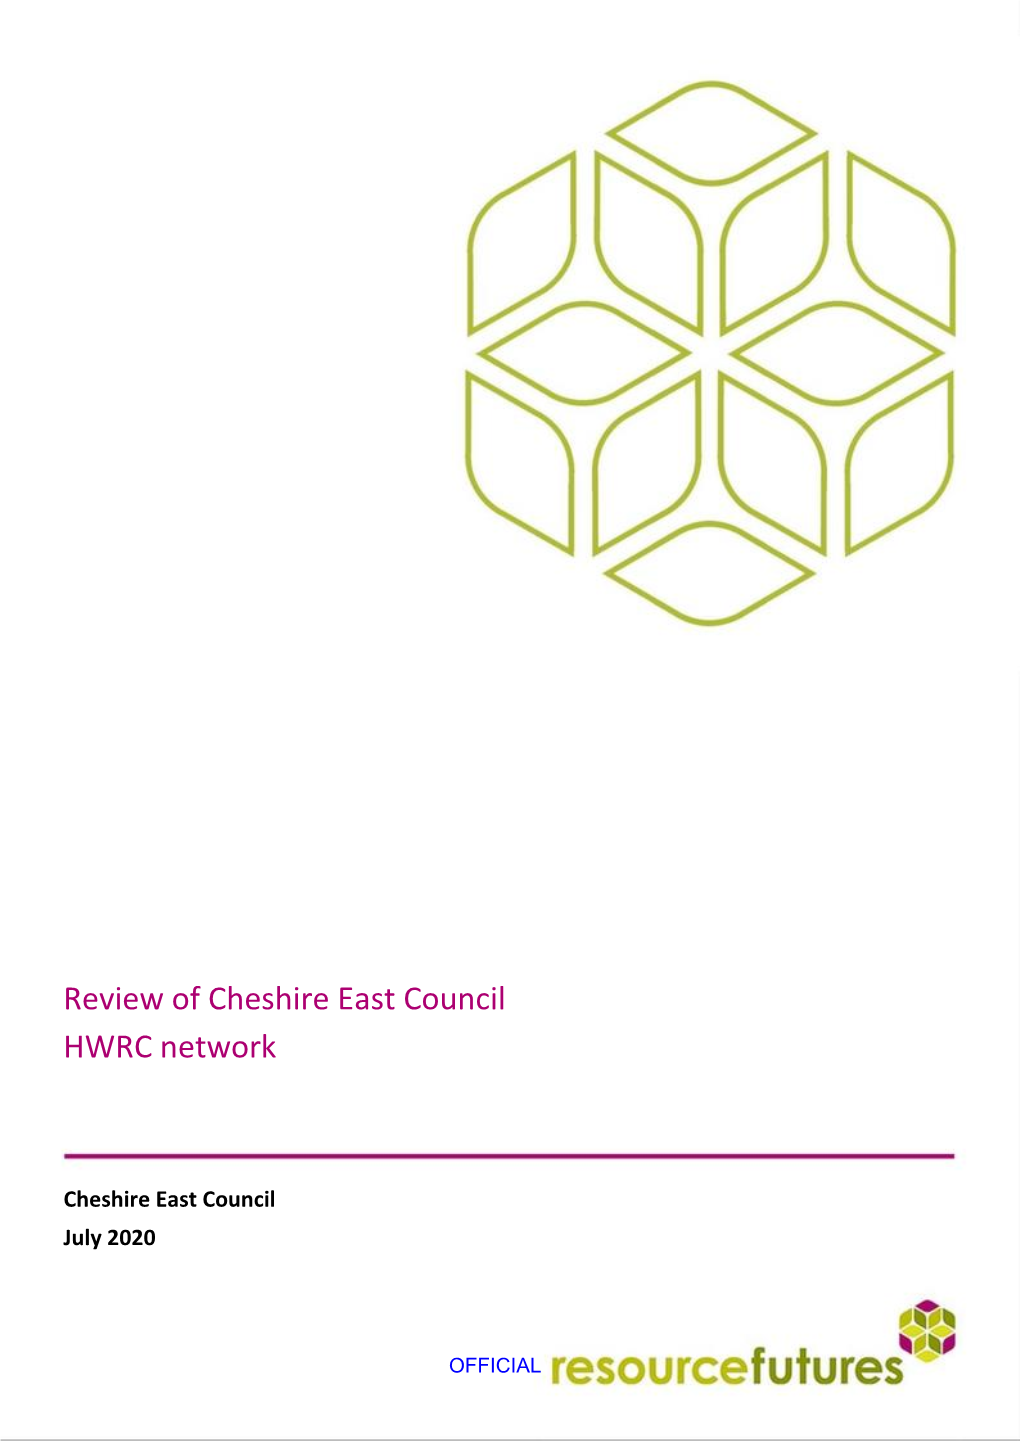 Review of Cheshire East Council HWRC Network